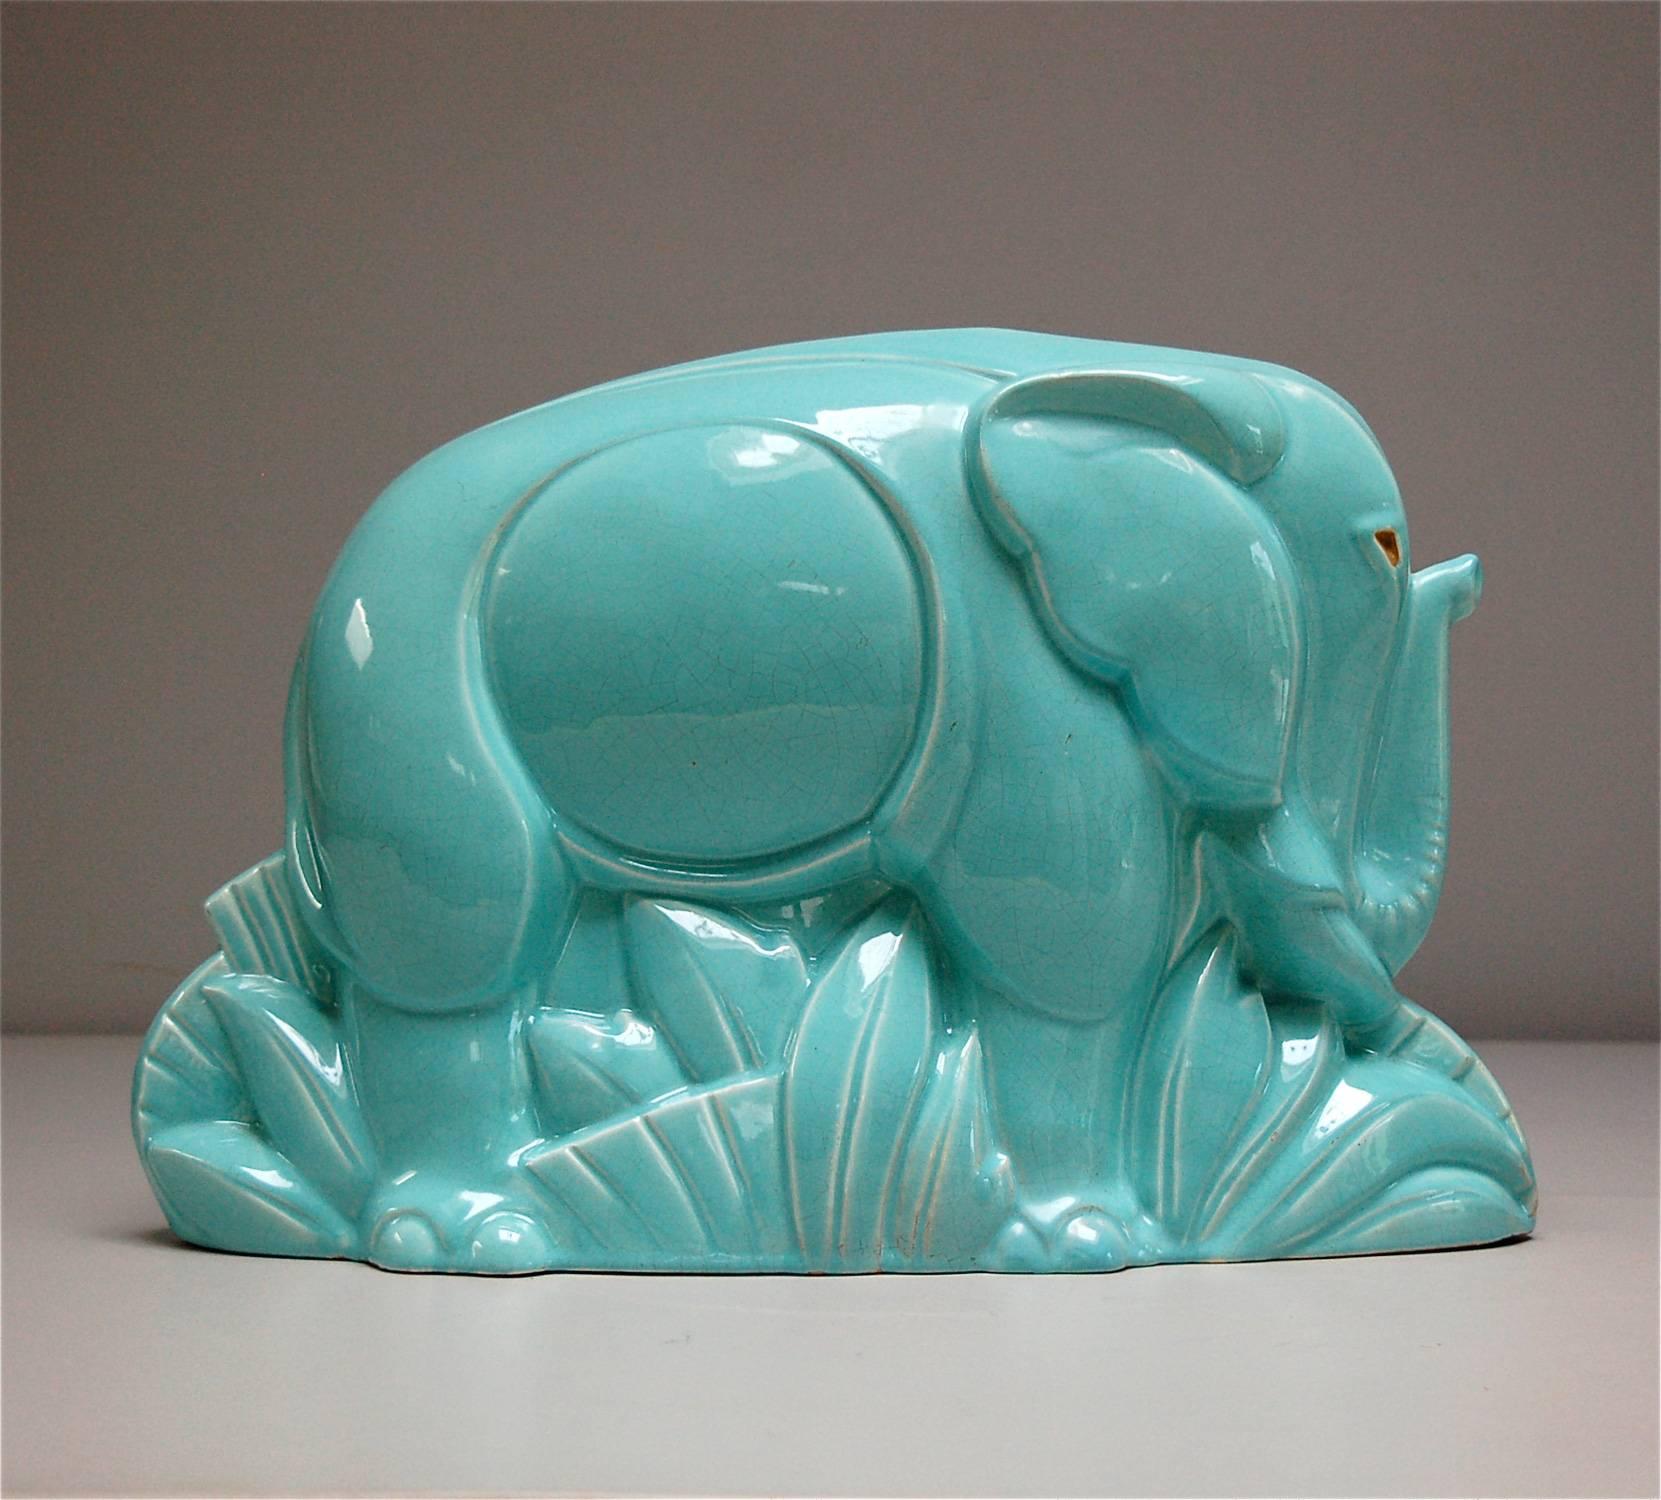 Charles Lemanceau is known for his animal sculptures and he is recognised as being one of the most important sculptors of the French Art Deco period. This crackle glaze ceramic elephant is a more rare edition in contrast to the smaller, white